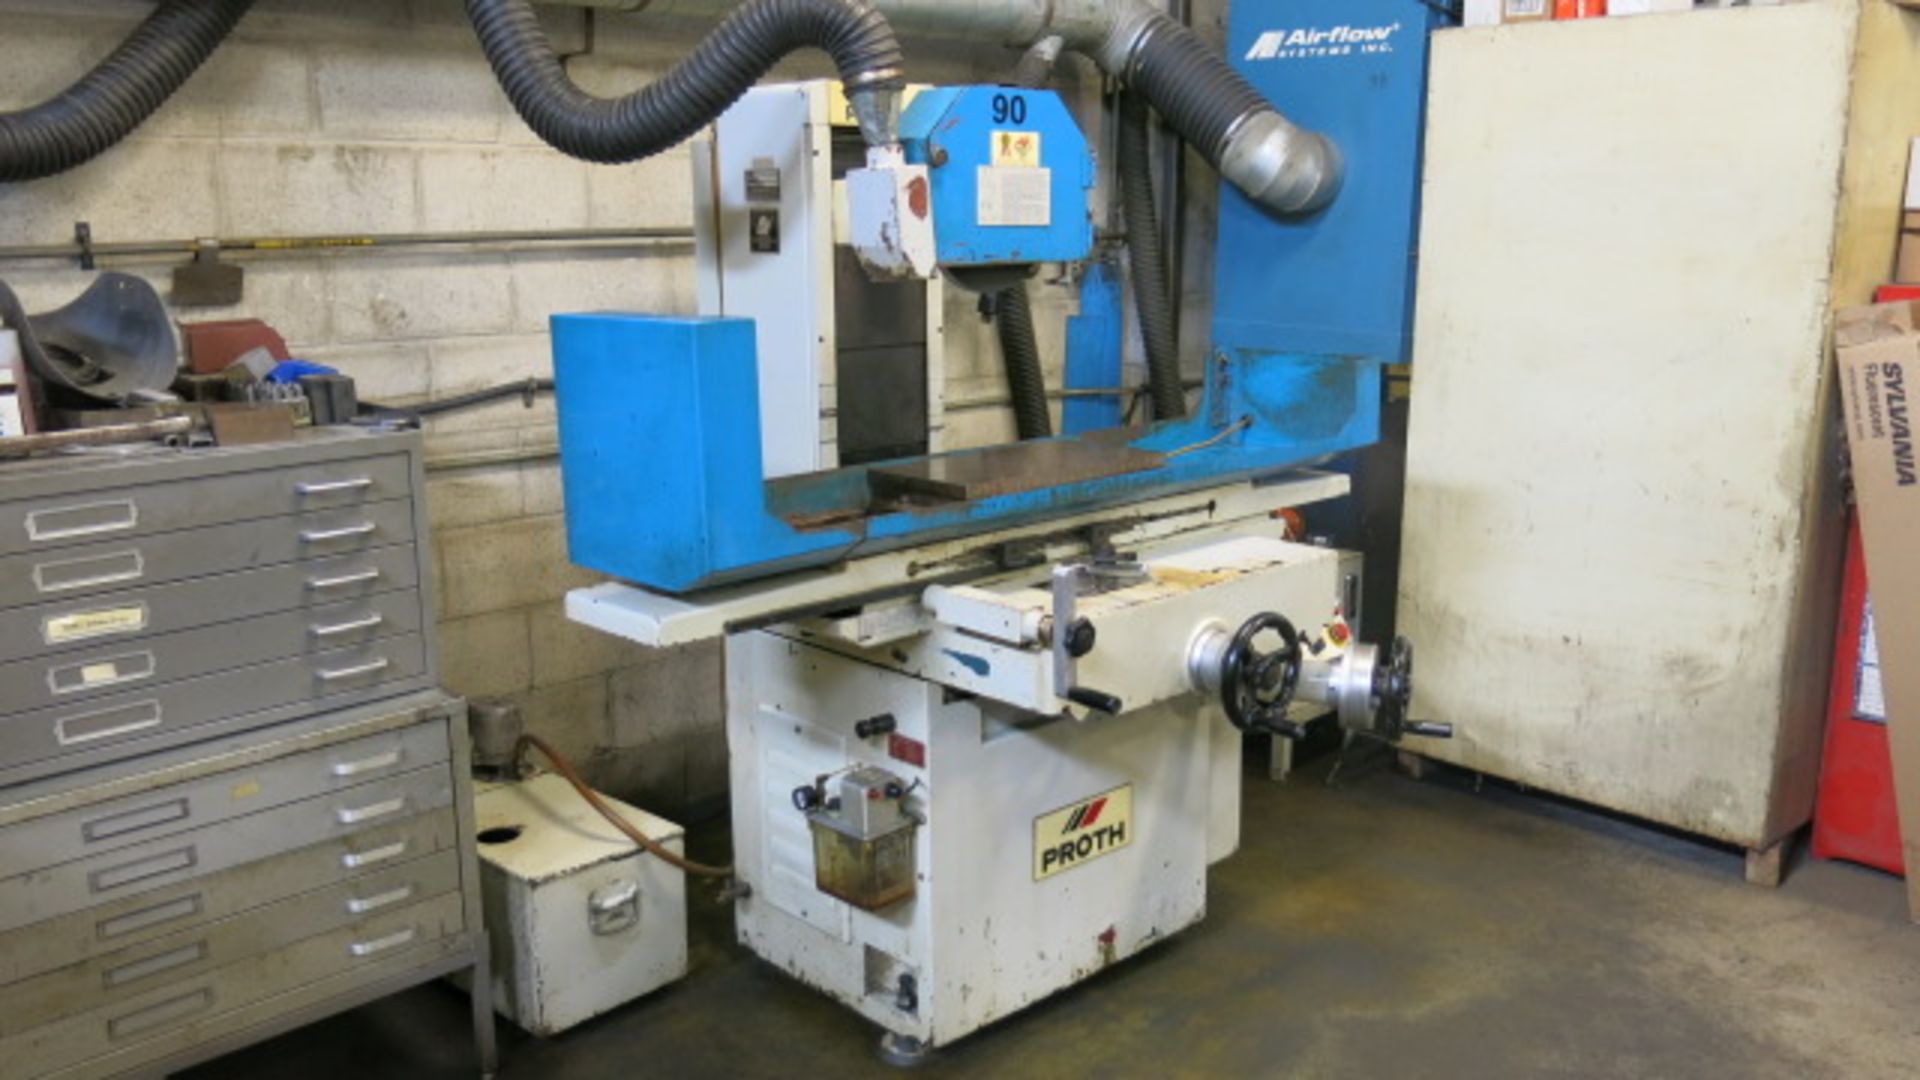 PROTH, PSGS-250AH, SEMI-AUTOMATIC, HYDRAULIC SURFACE GRINDER, 20" X 10 ELECTRO-MAGNETIC CHUCK, 14"